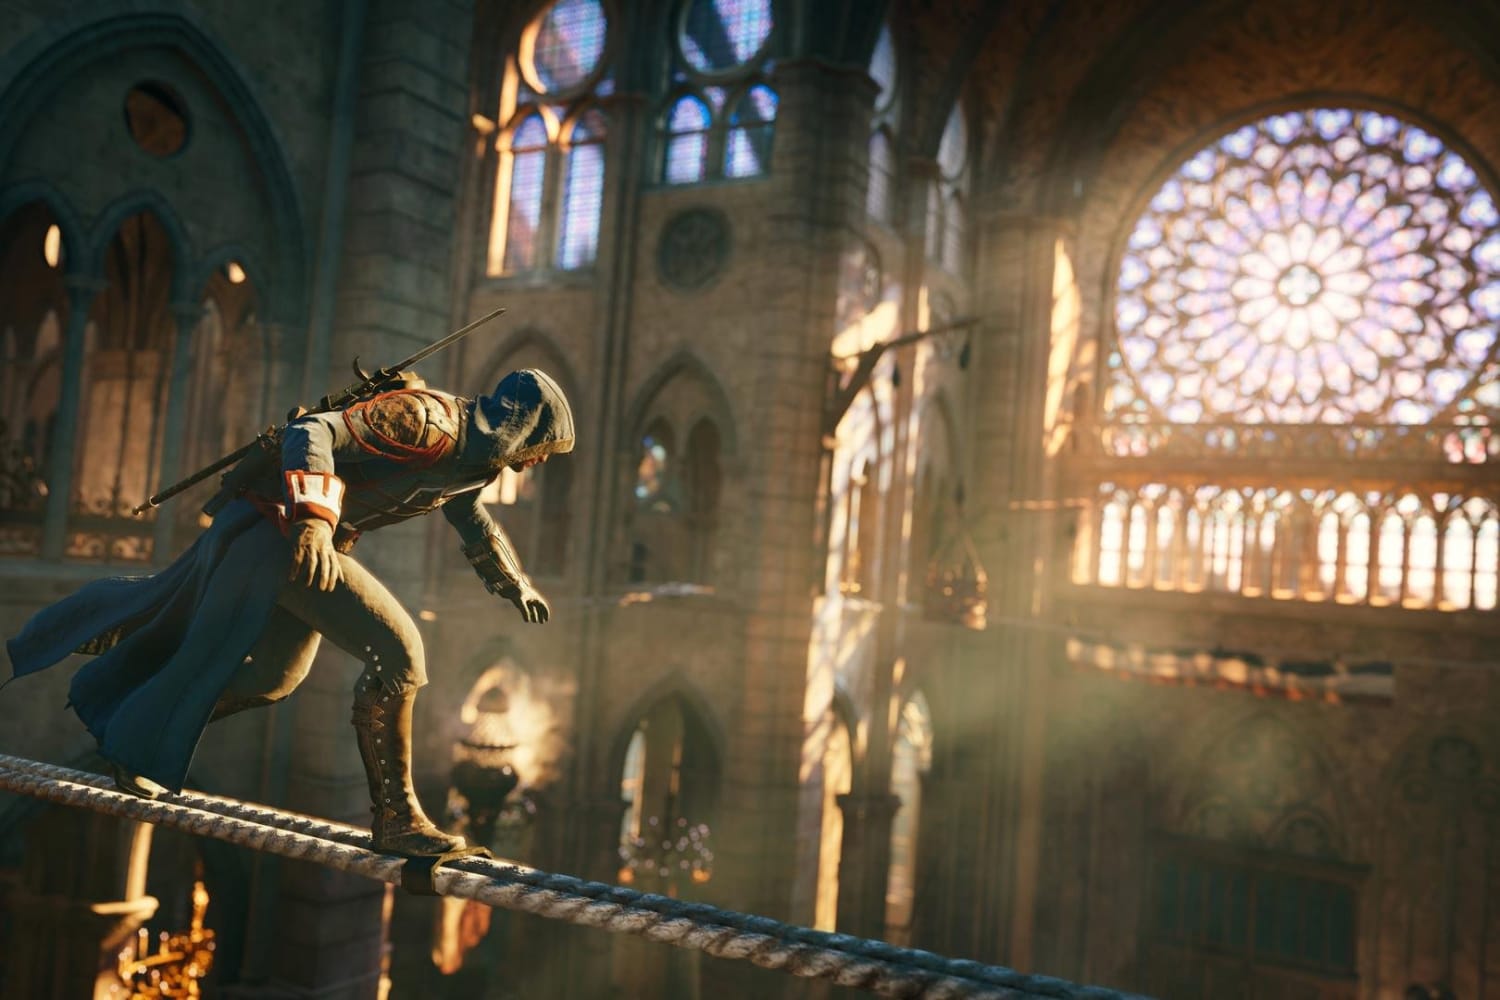 parachute tribe Earn Assassin's Creed Unity preview and interview